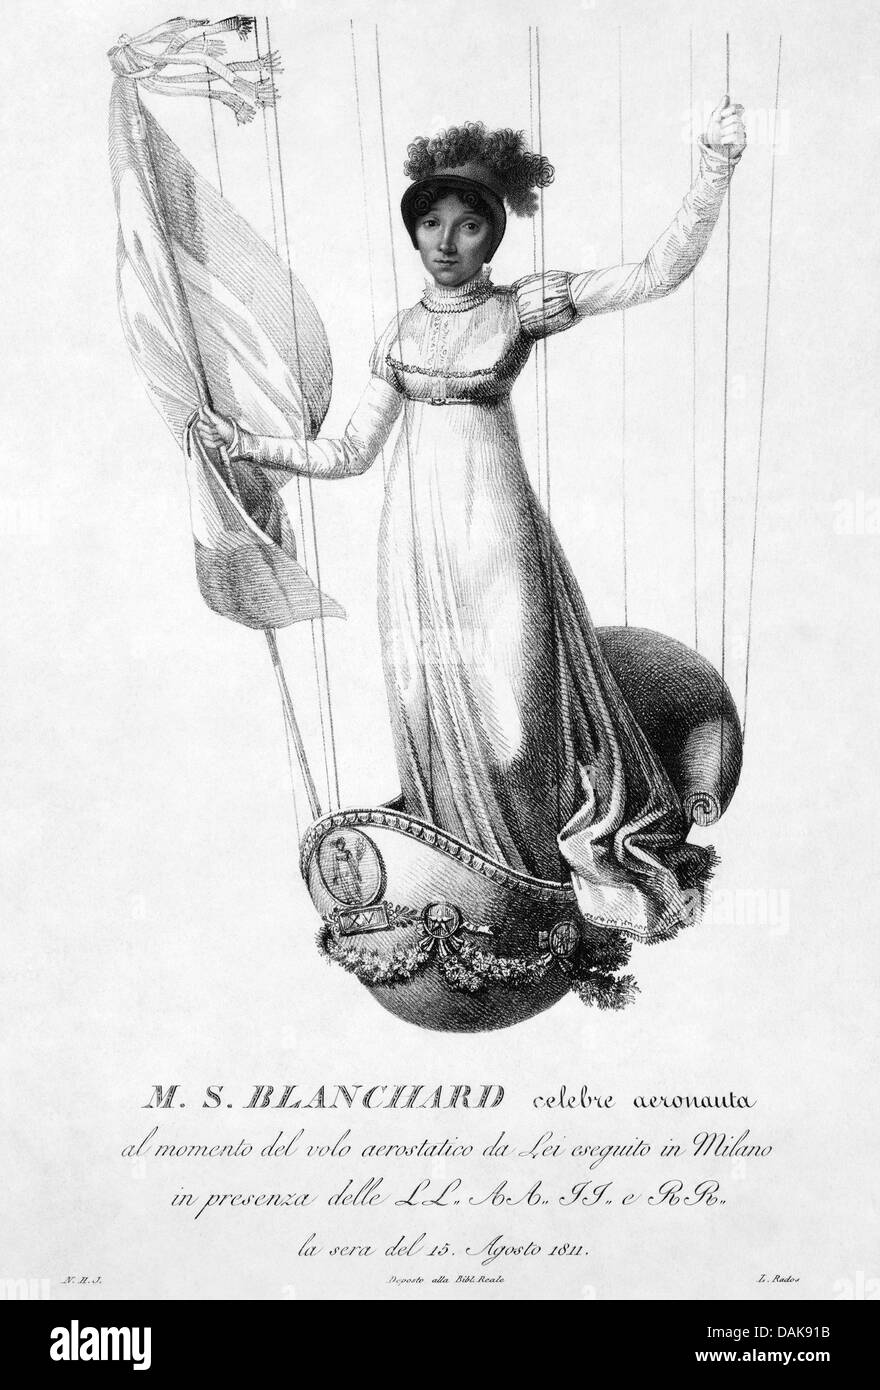 SOPHIE BLANCHARD (1778-1819) French aeronaut in  an engraving commemorating her ascent in Milan 15 August 1811 - see below Stock Photo